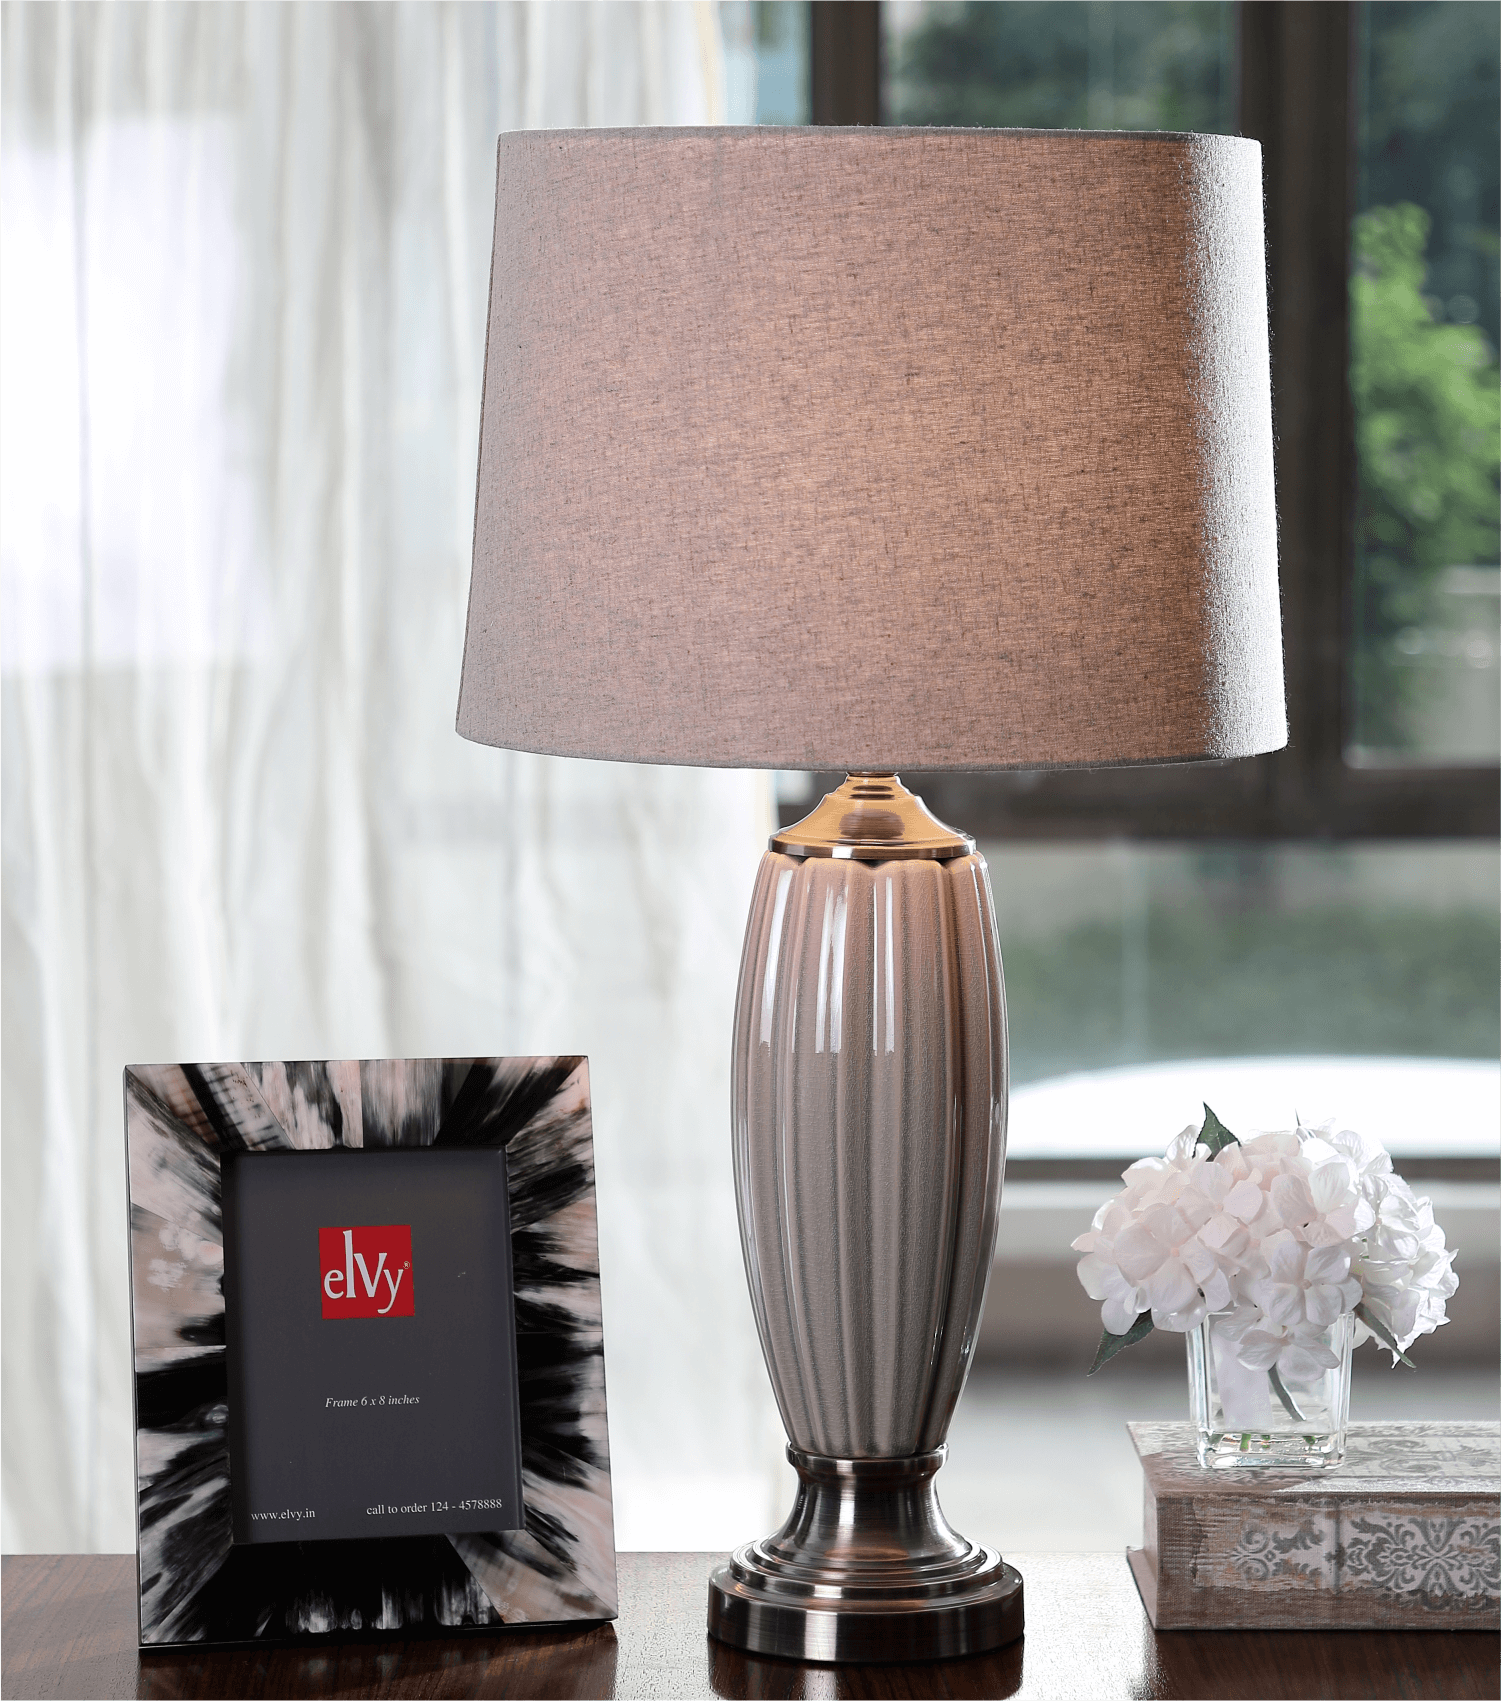 Celestial Taupe lamp